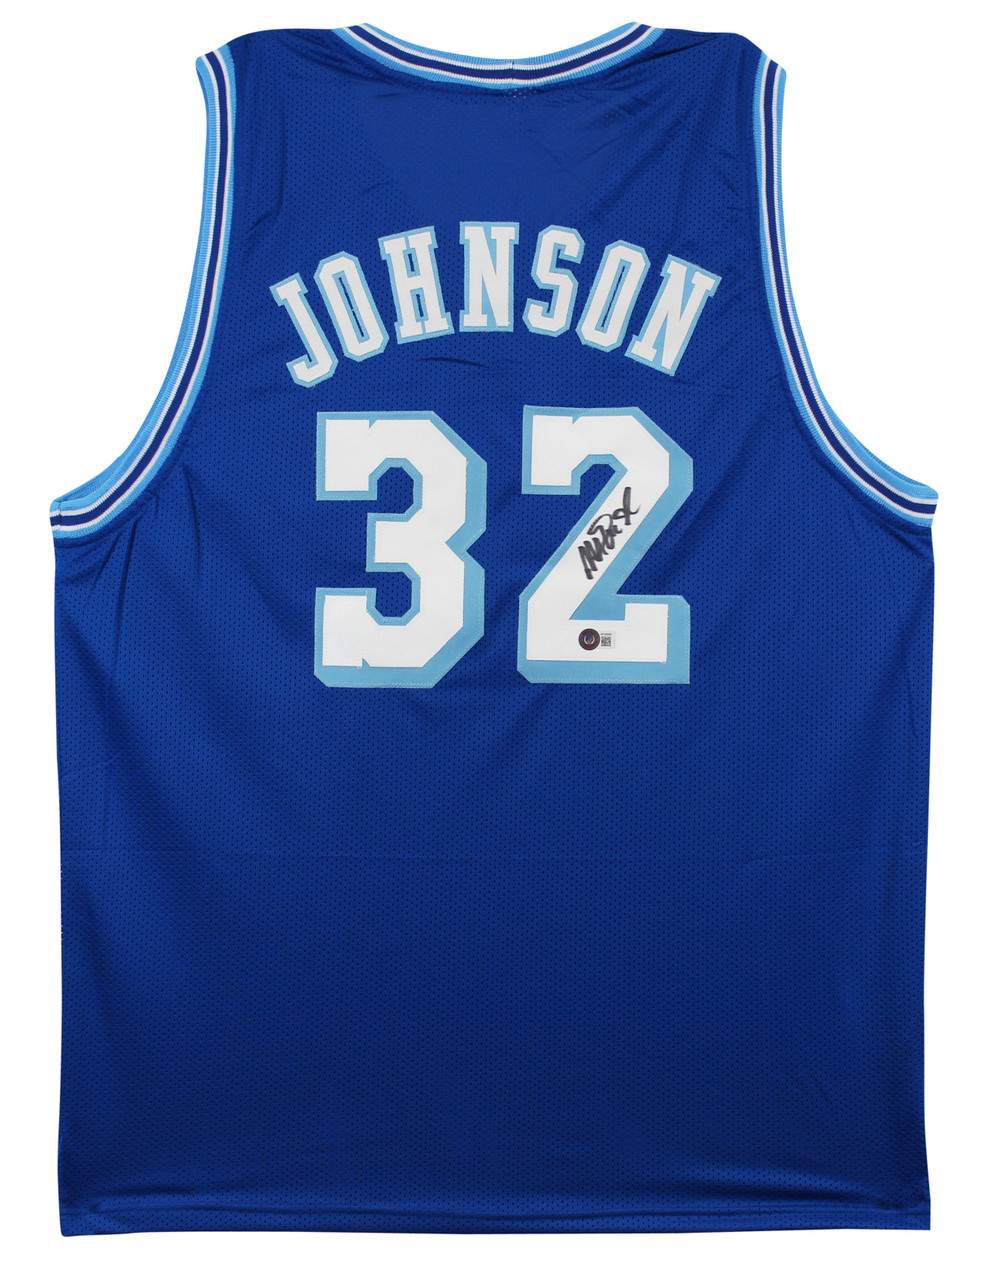 Press Pass Collectibles Magic Johnson Authentic Signed Blue Throwback Pro Style Jersey BAS Witnessed